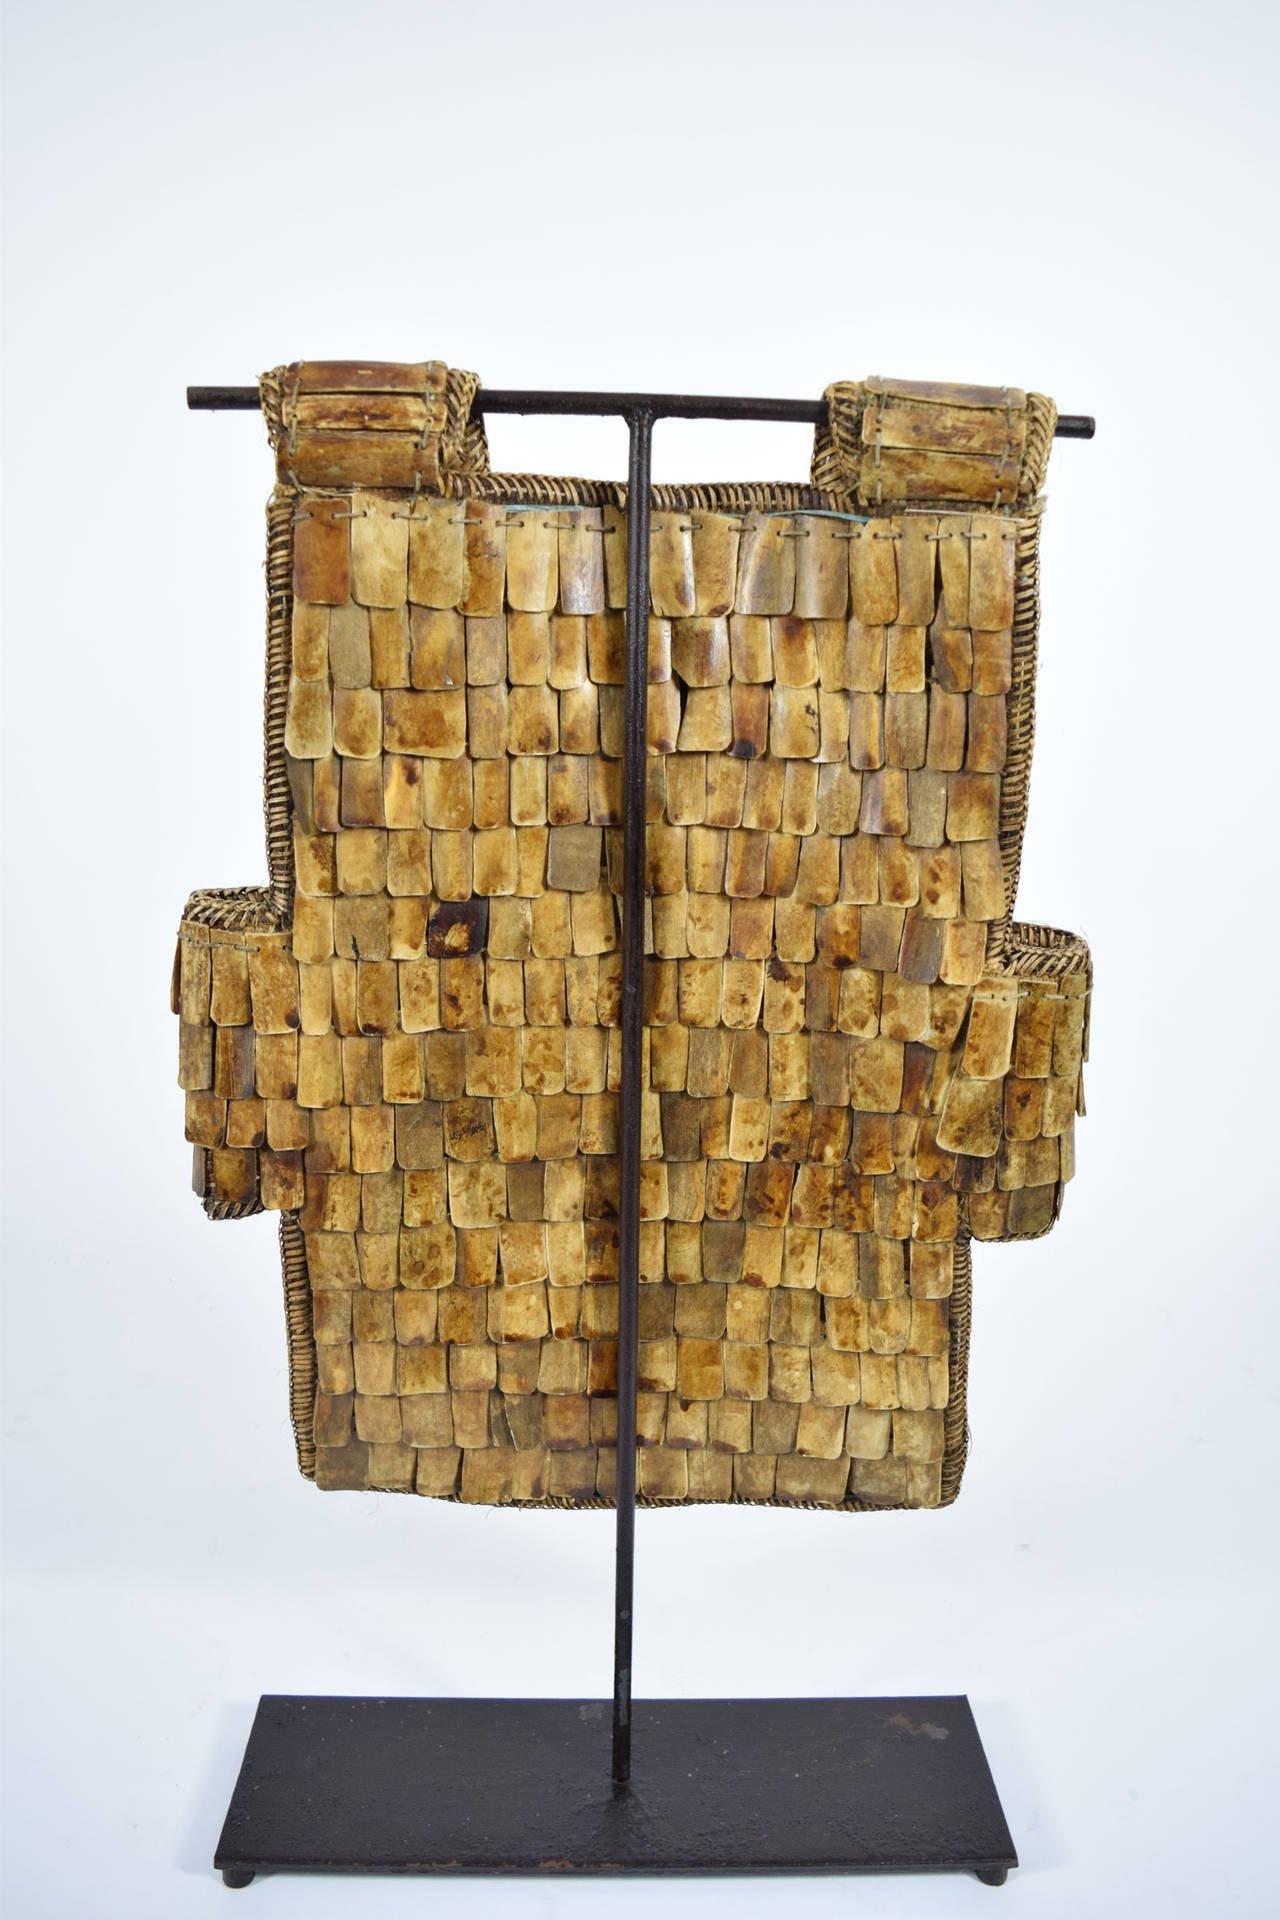 Indonesia, Borneo, Central Kalimantan, Dayak peoples, circa mid-20th century. A woven rattan chest plate adorned with overlapping slabs and discs of turtle and crocodile bone. Two long cords with stone toggles hang down the front.